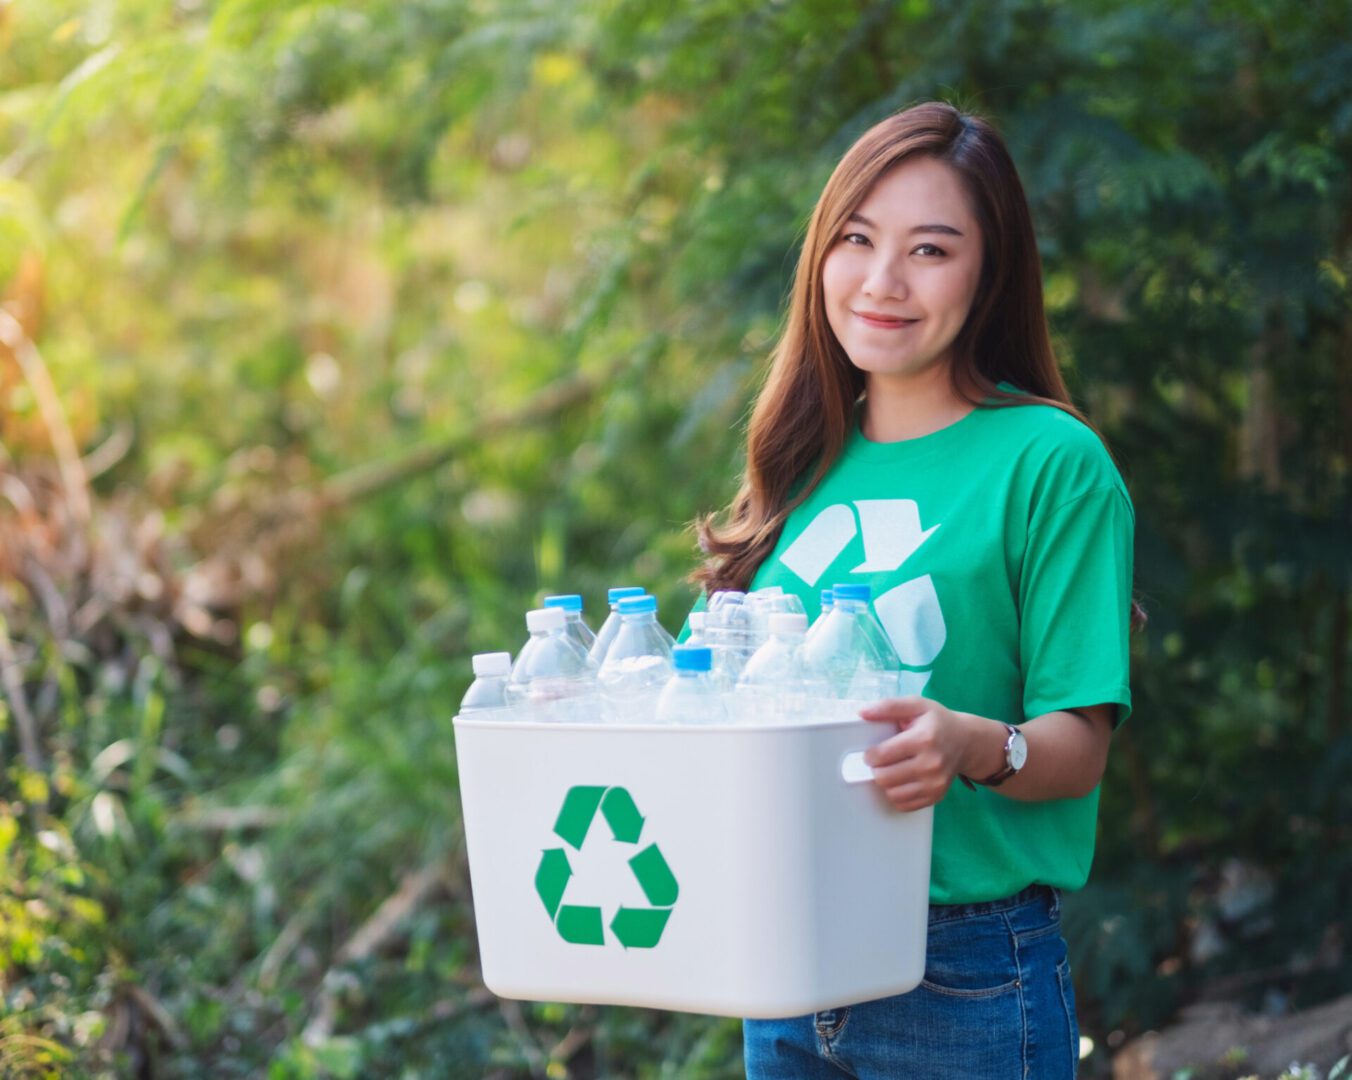 How Does Recycling Save Energy & Conserves Resources